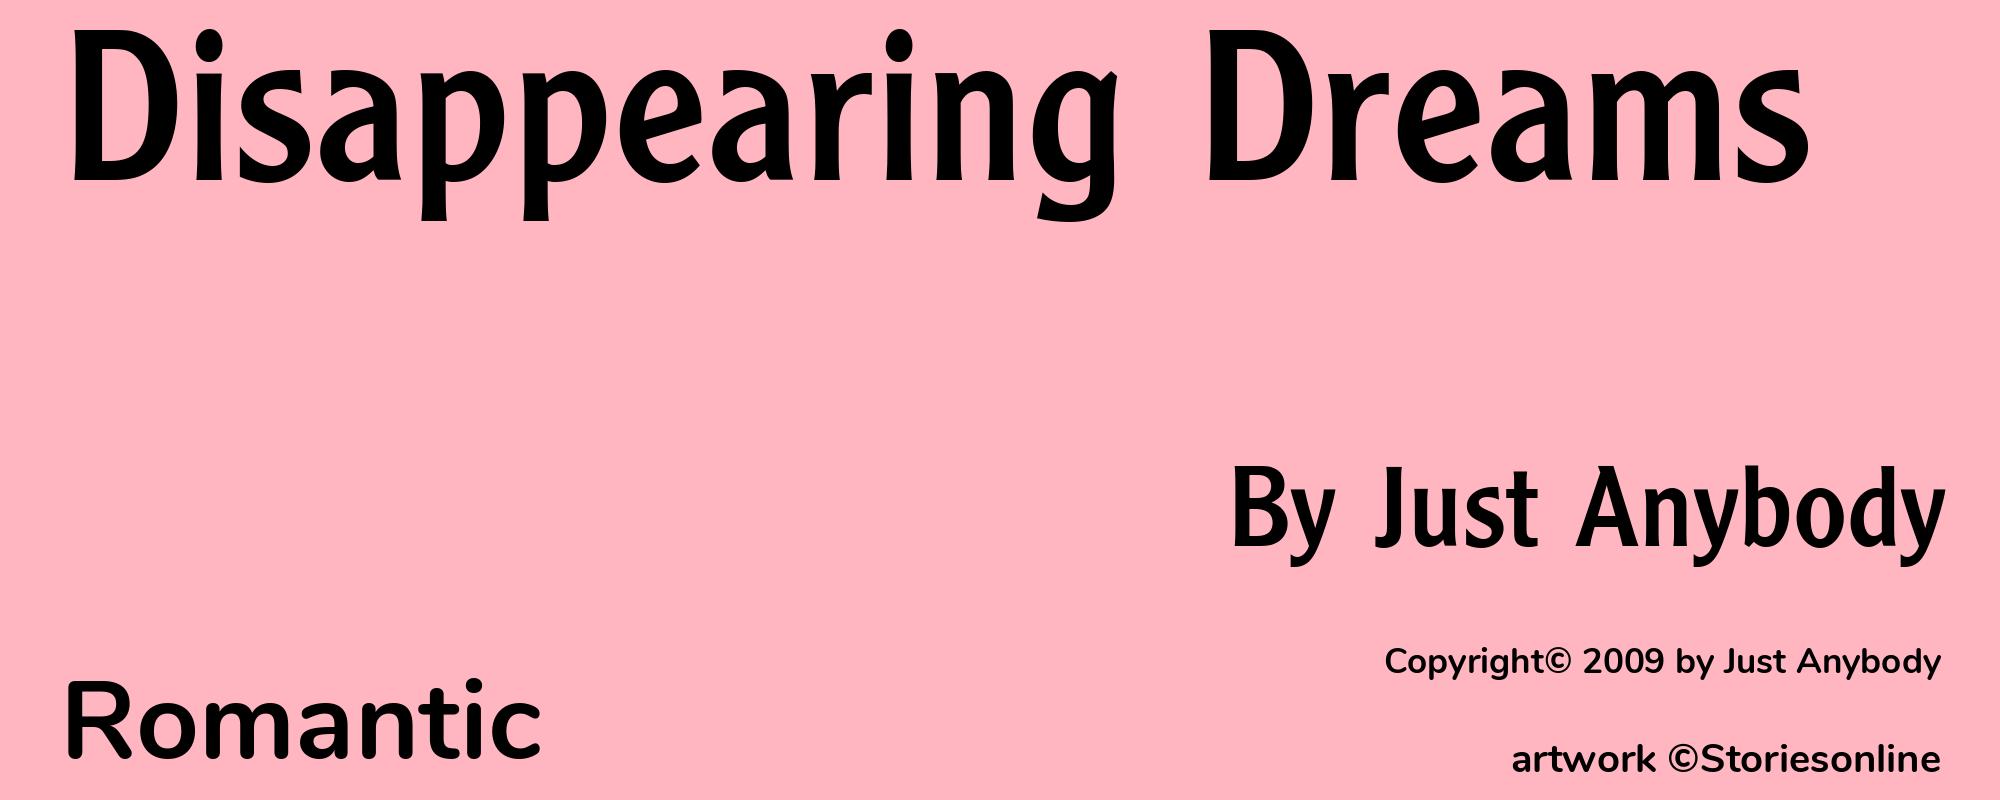 Disappearing Dreams - Cover